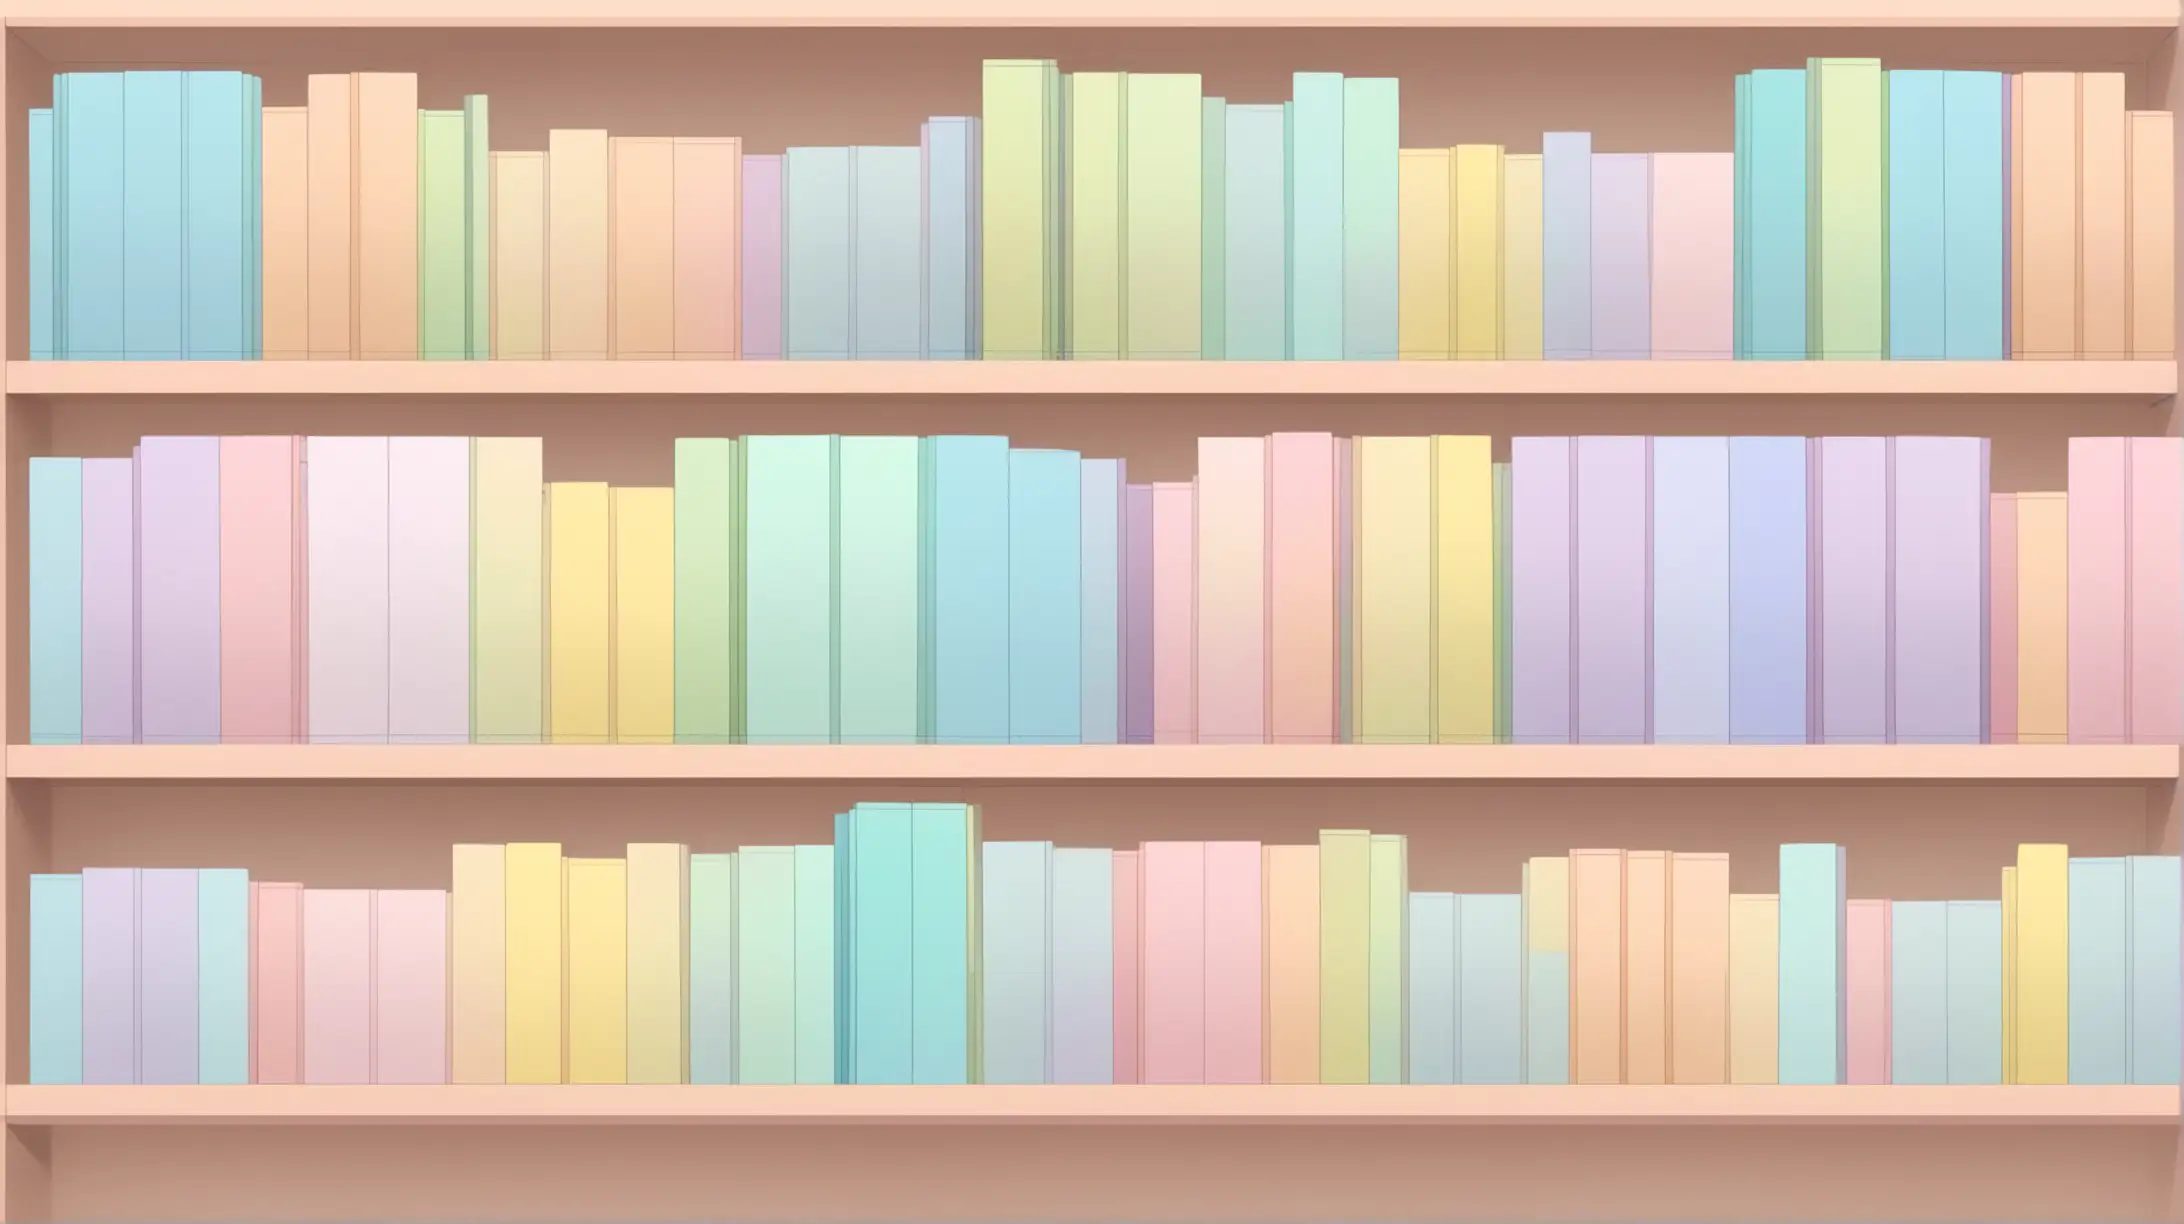 Generate an image of pastel color books on a shelf, not too detailed.